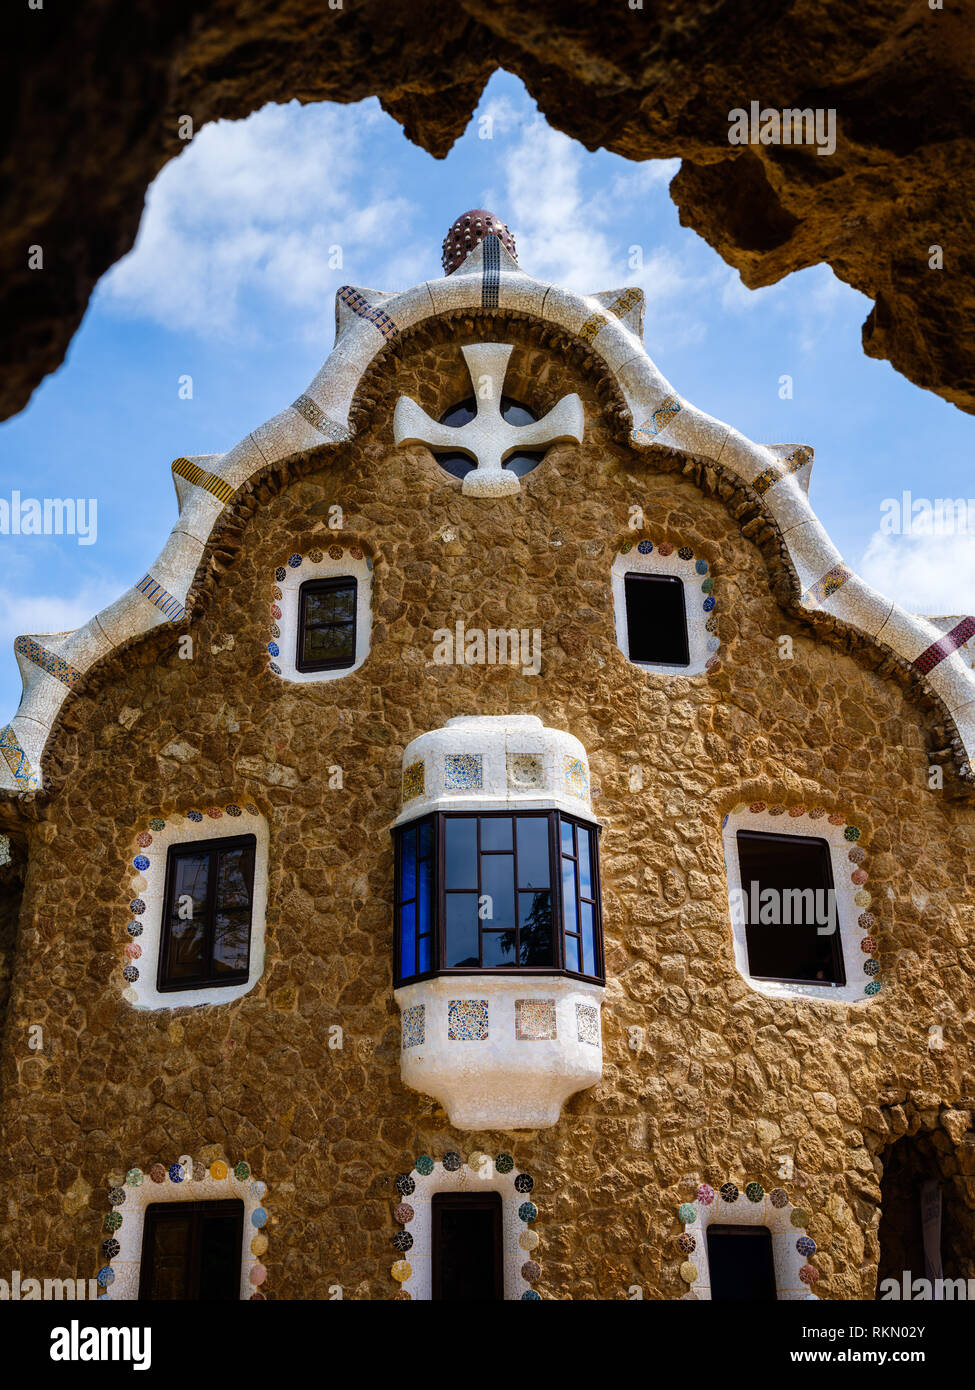 BARCELONA, SPAIN - CIRCA MAY 2018: Entrance pavilion of Parc Güel. Parque Güell is a public park system composed of gardens and architectonic elements Stock Photo